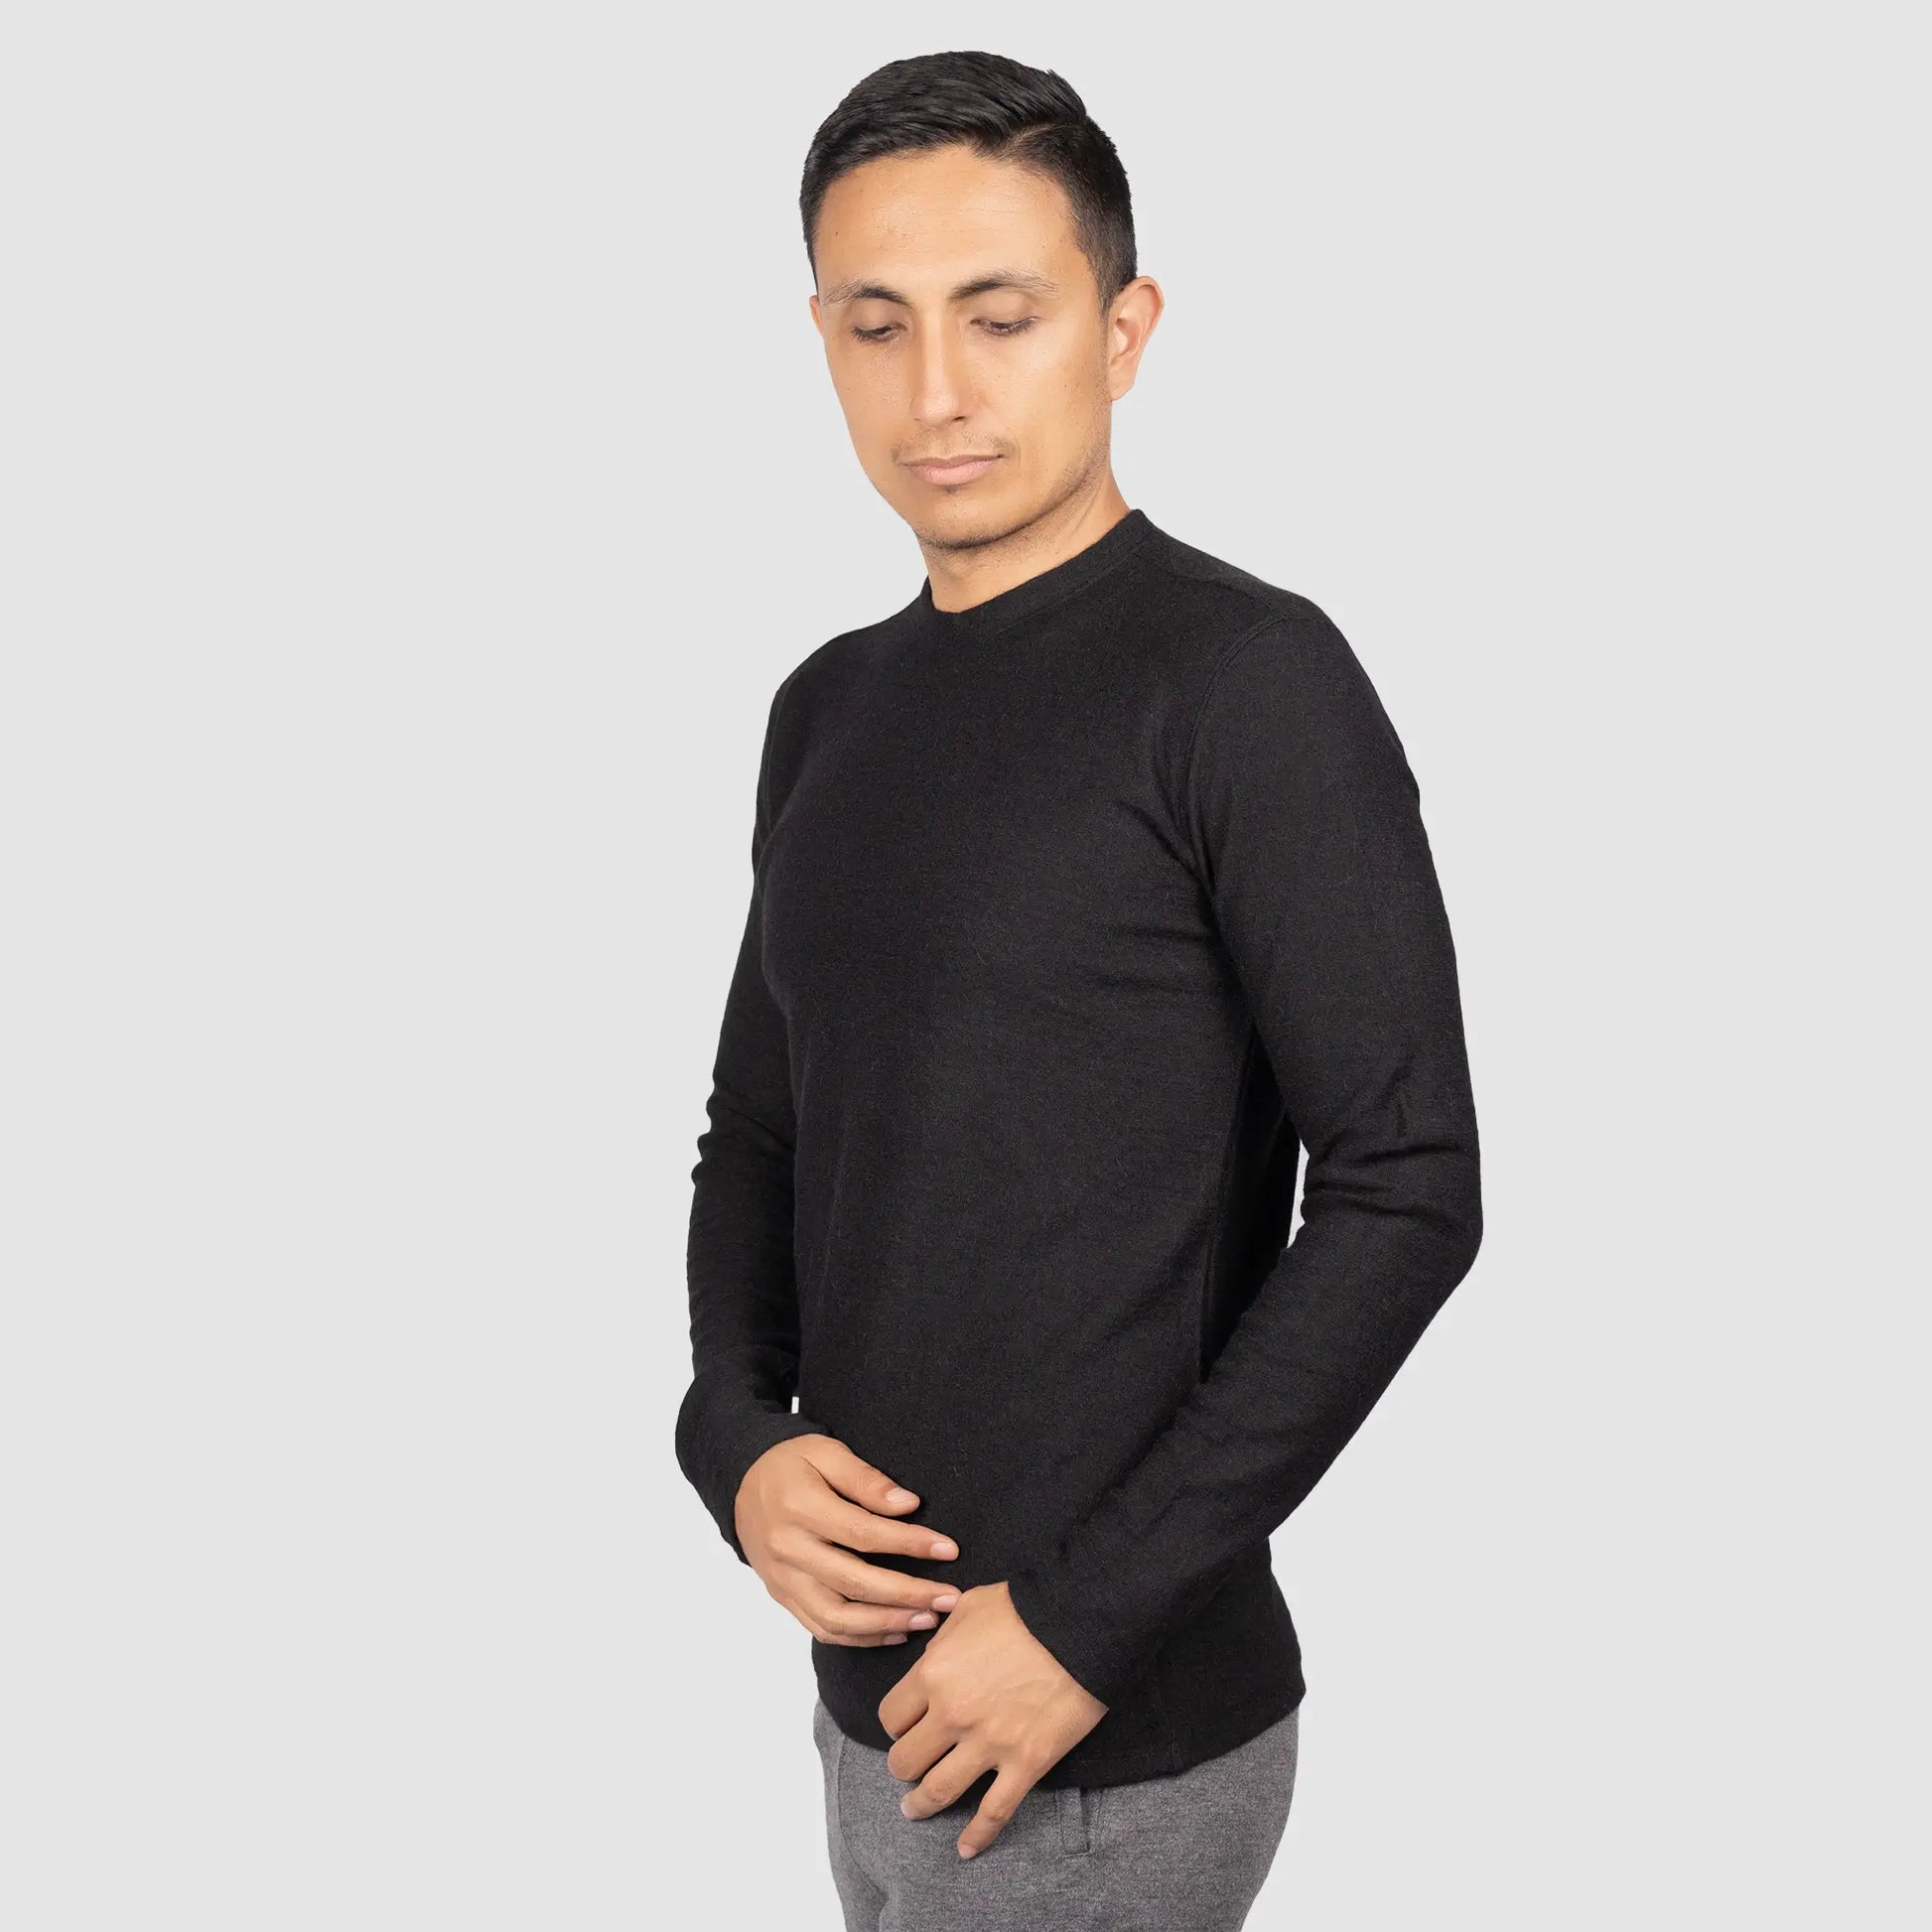 Men's Alpaca Wool Long Sleeve Base Layer: 250 Lightweight | Arms of Andes Black / M